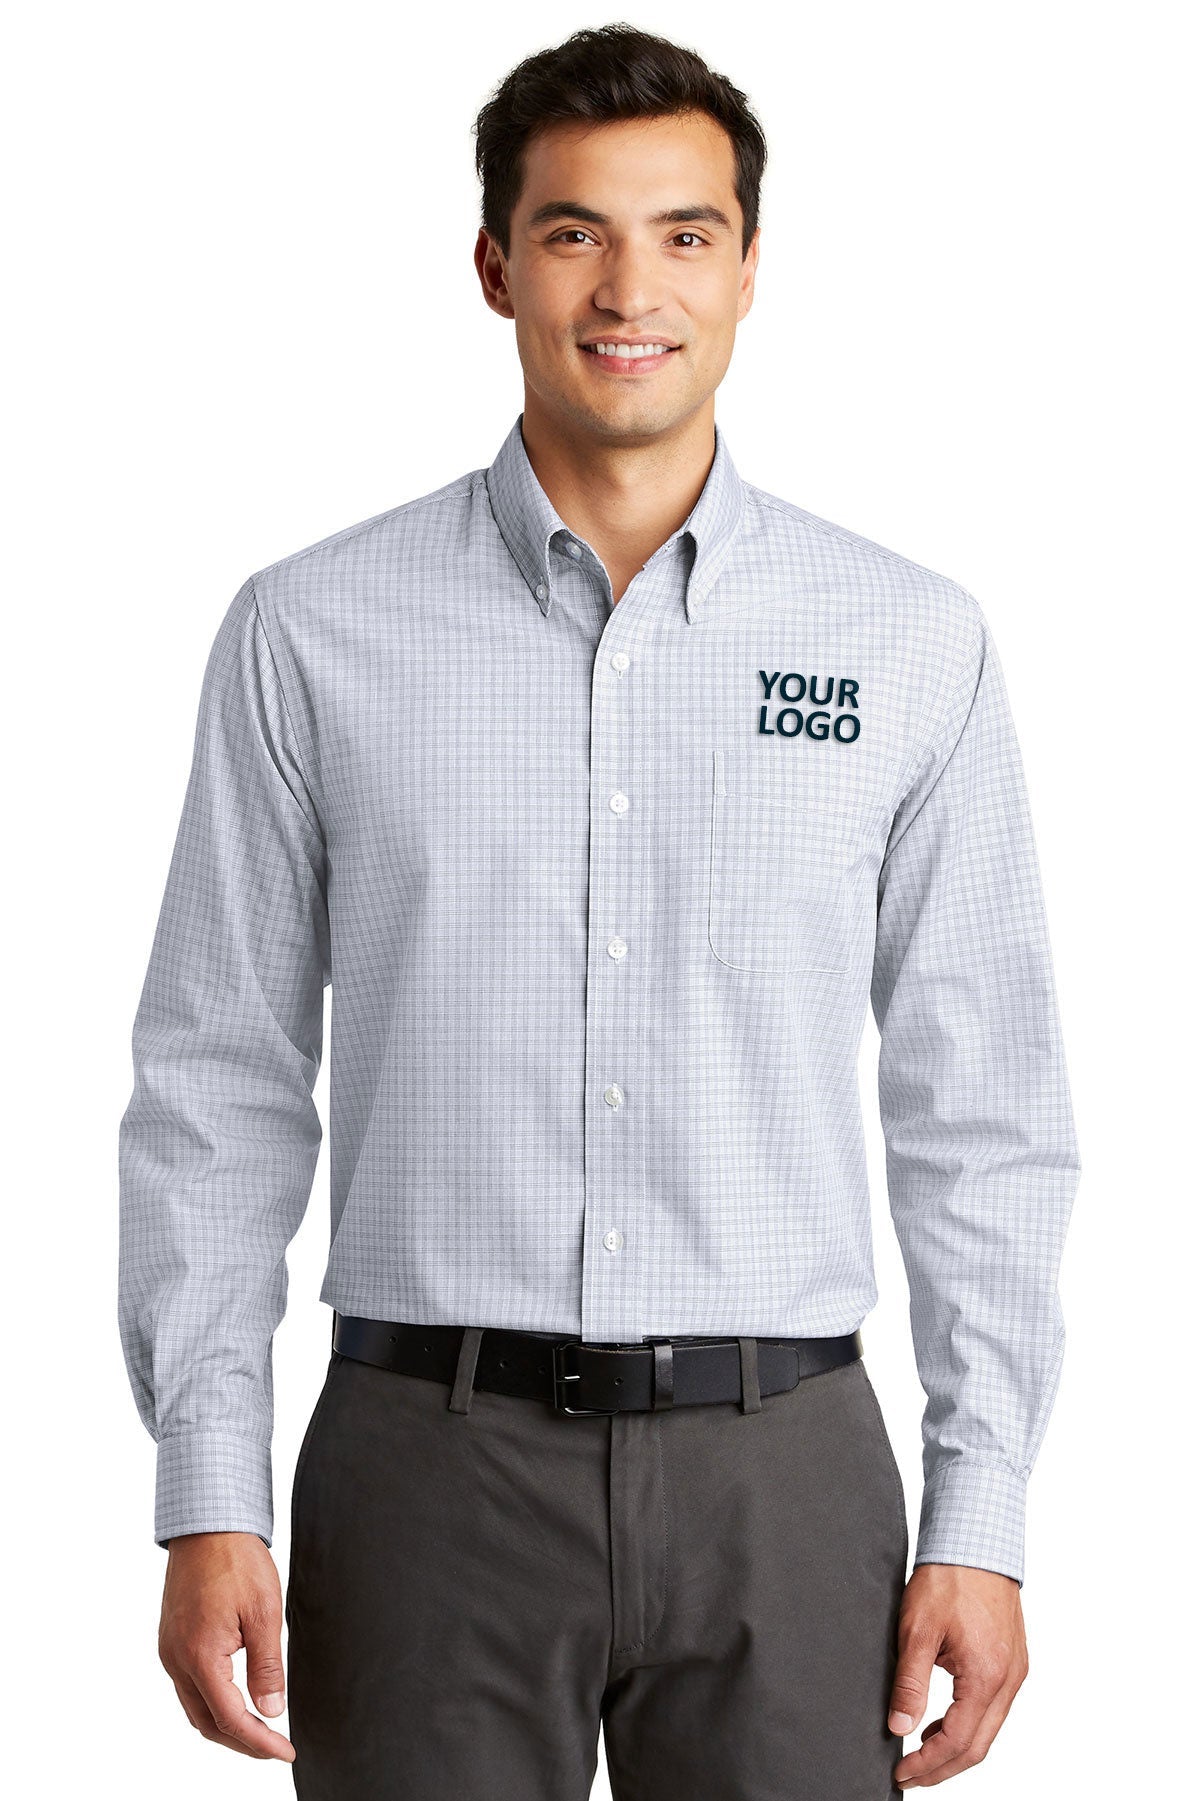 Port Authority White S639 work shirts with logo